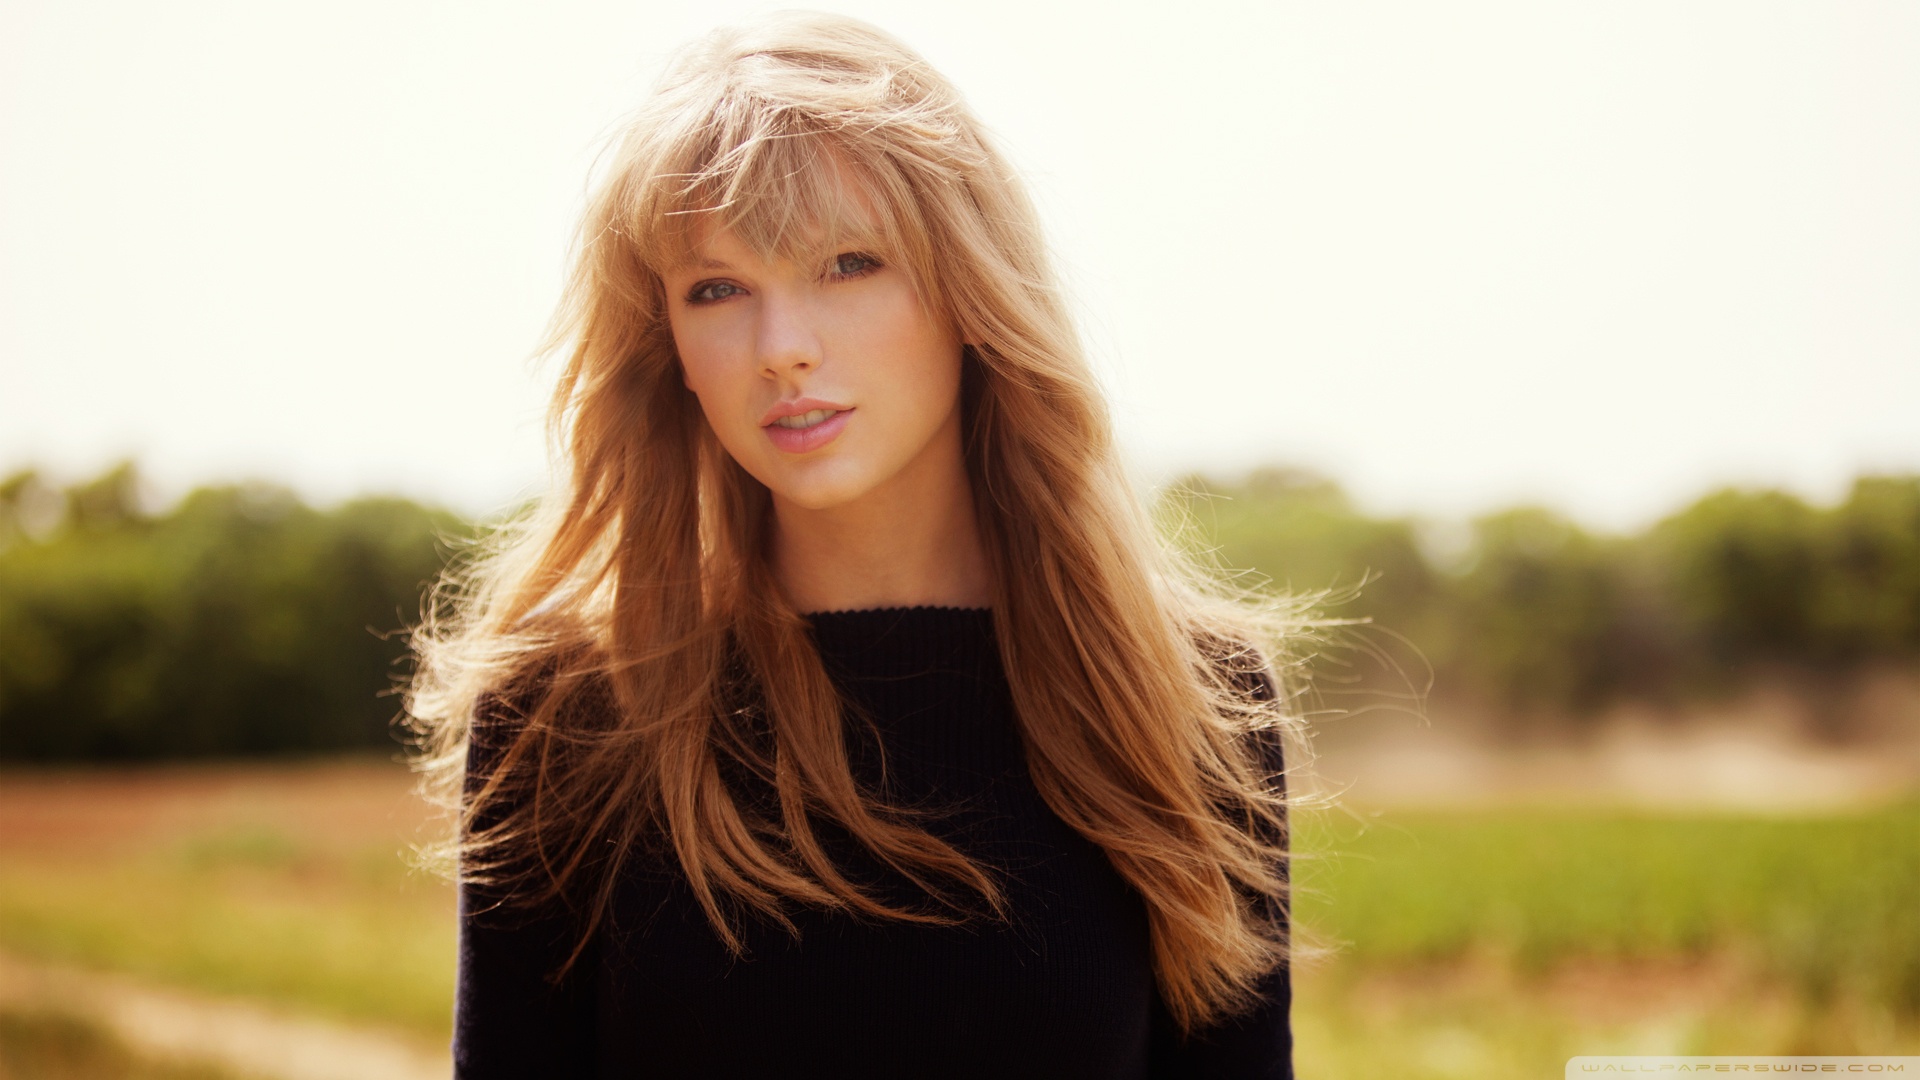 Taylor Swift Wallpaper High Quality